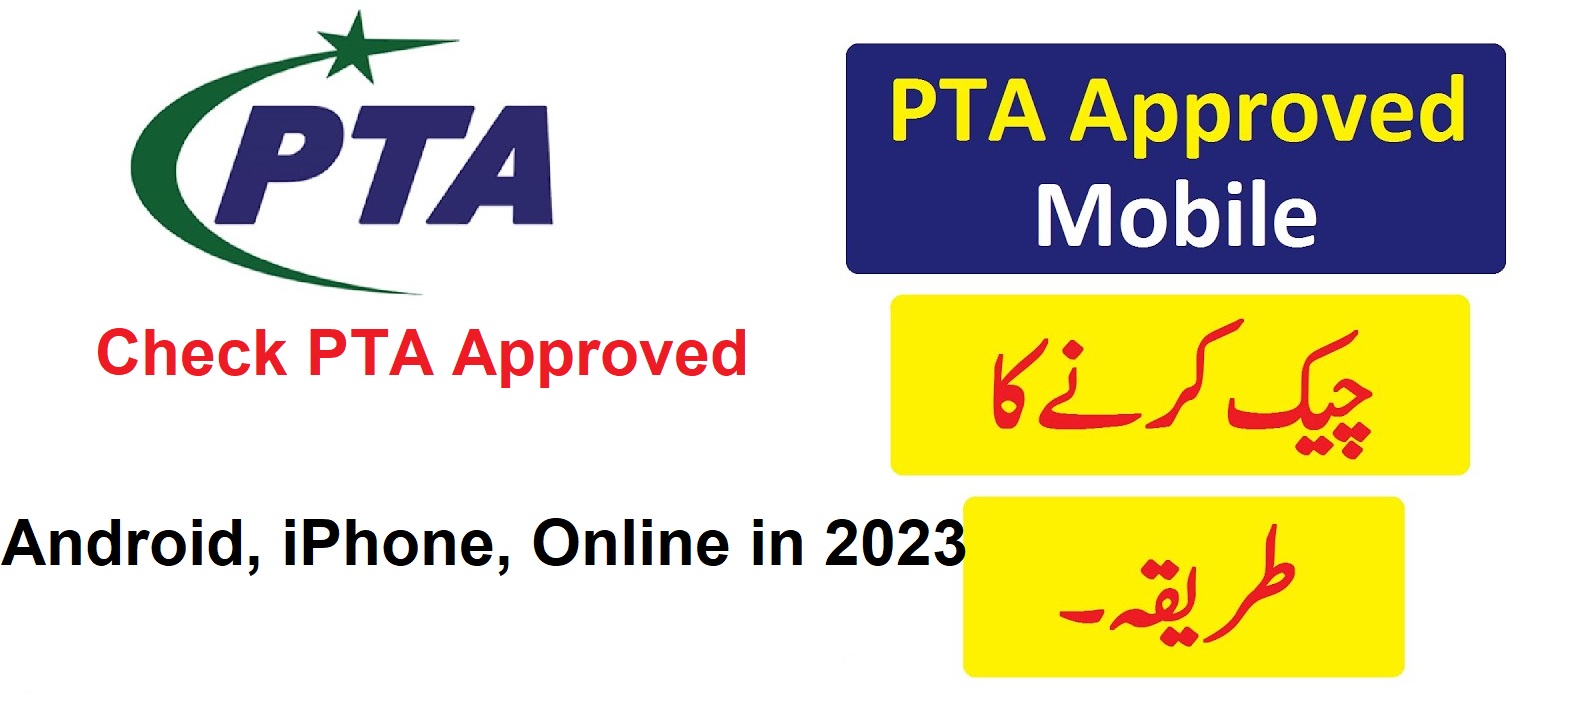 How to Check PTA Approved Android iPhone Online